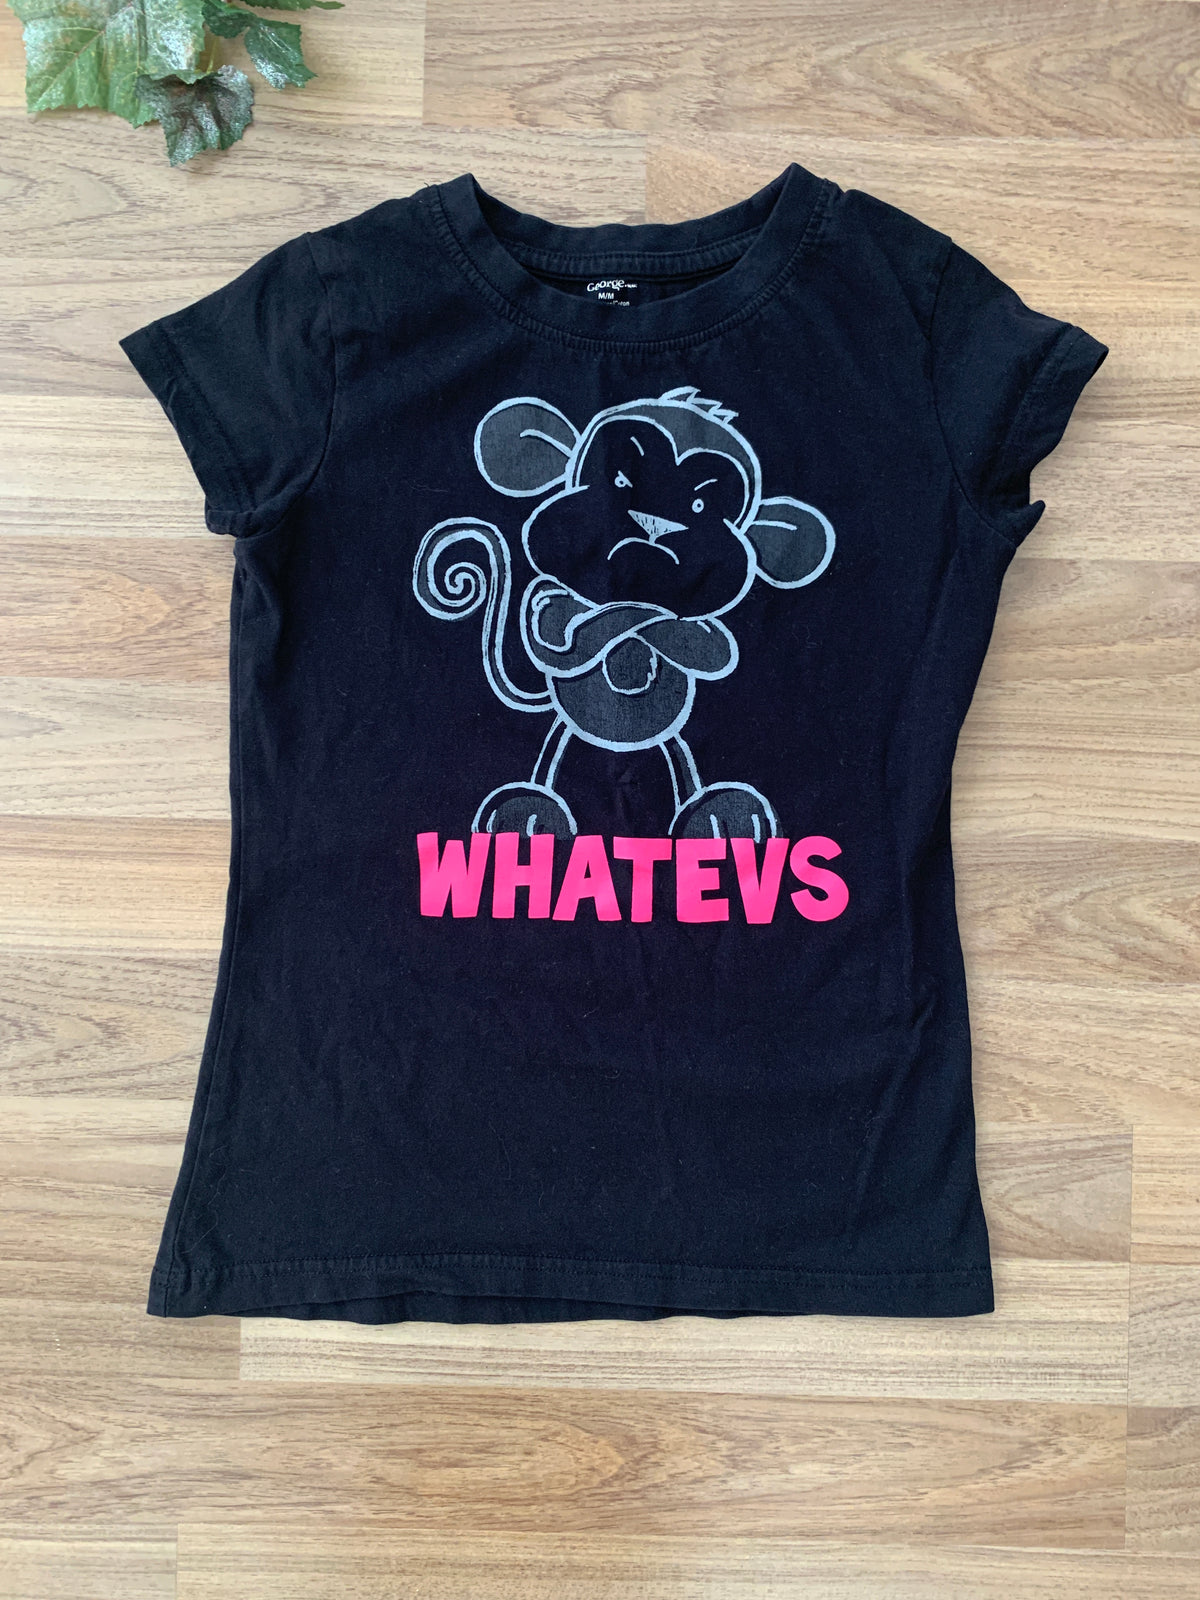 Short Sleeve Graphic Top (Girls Size 7-8)